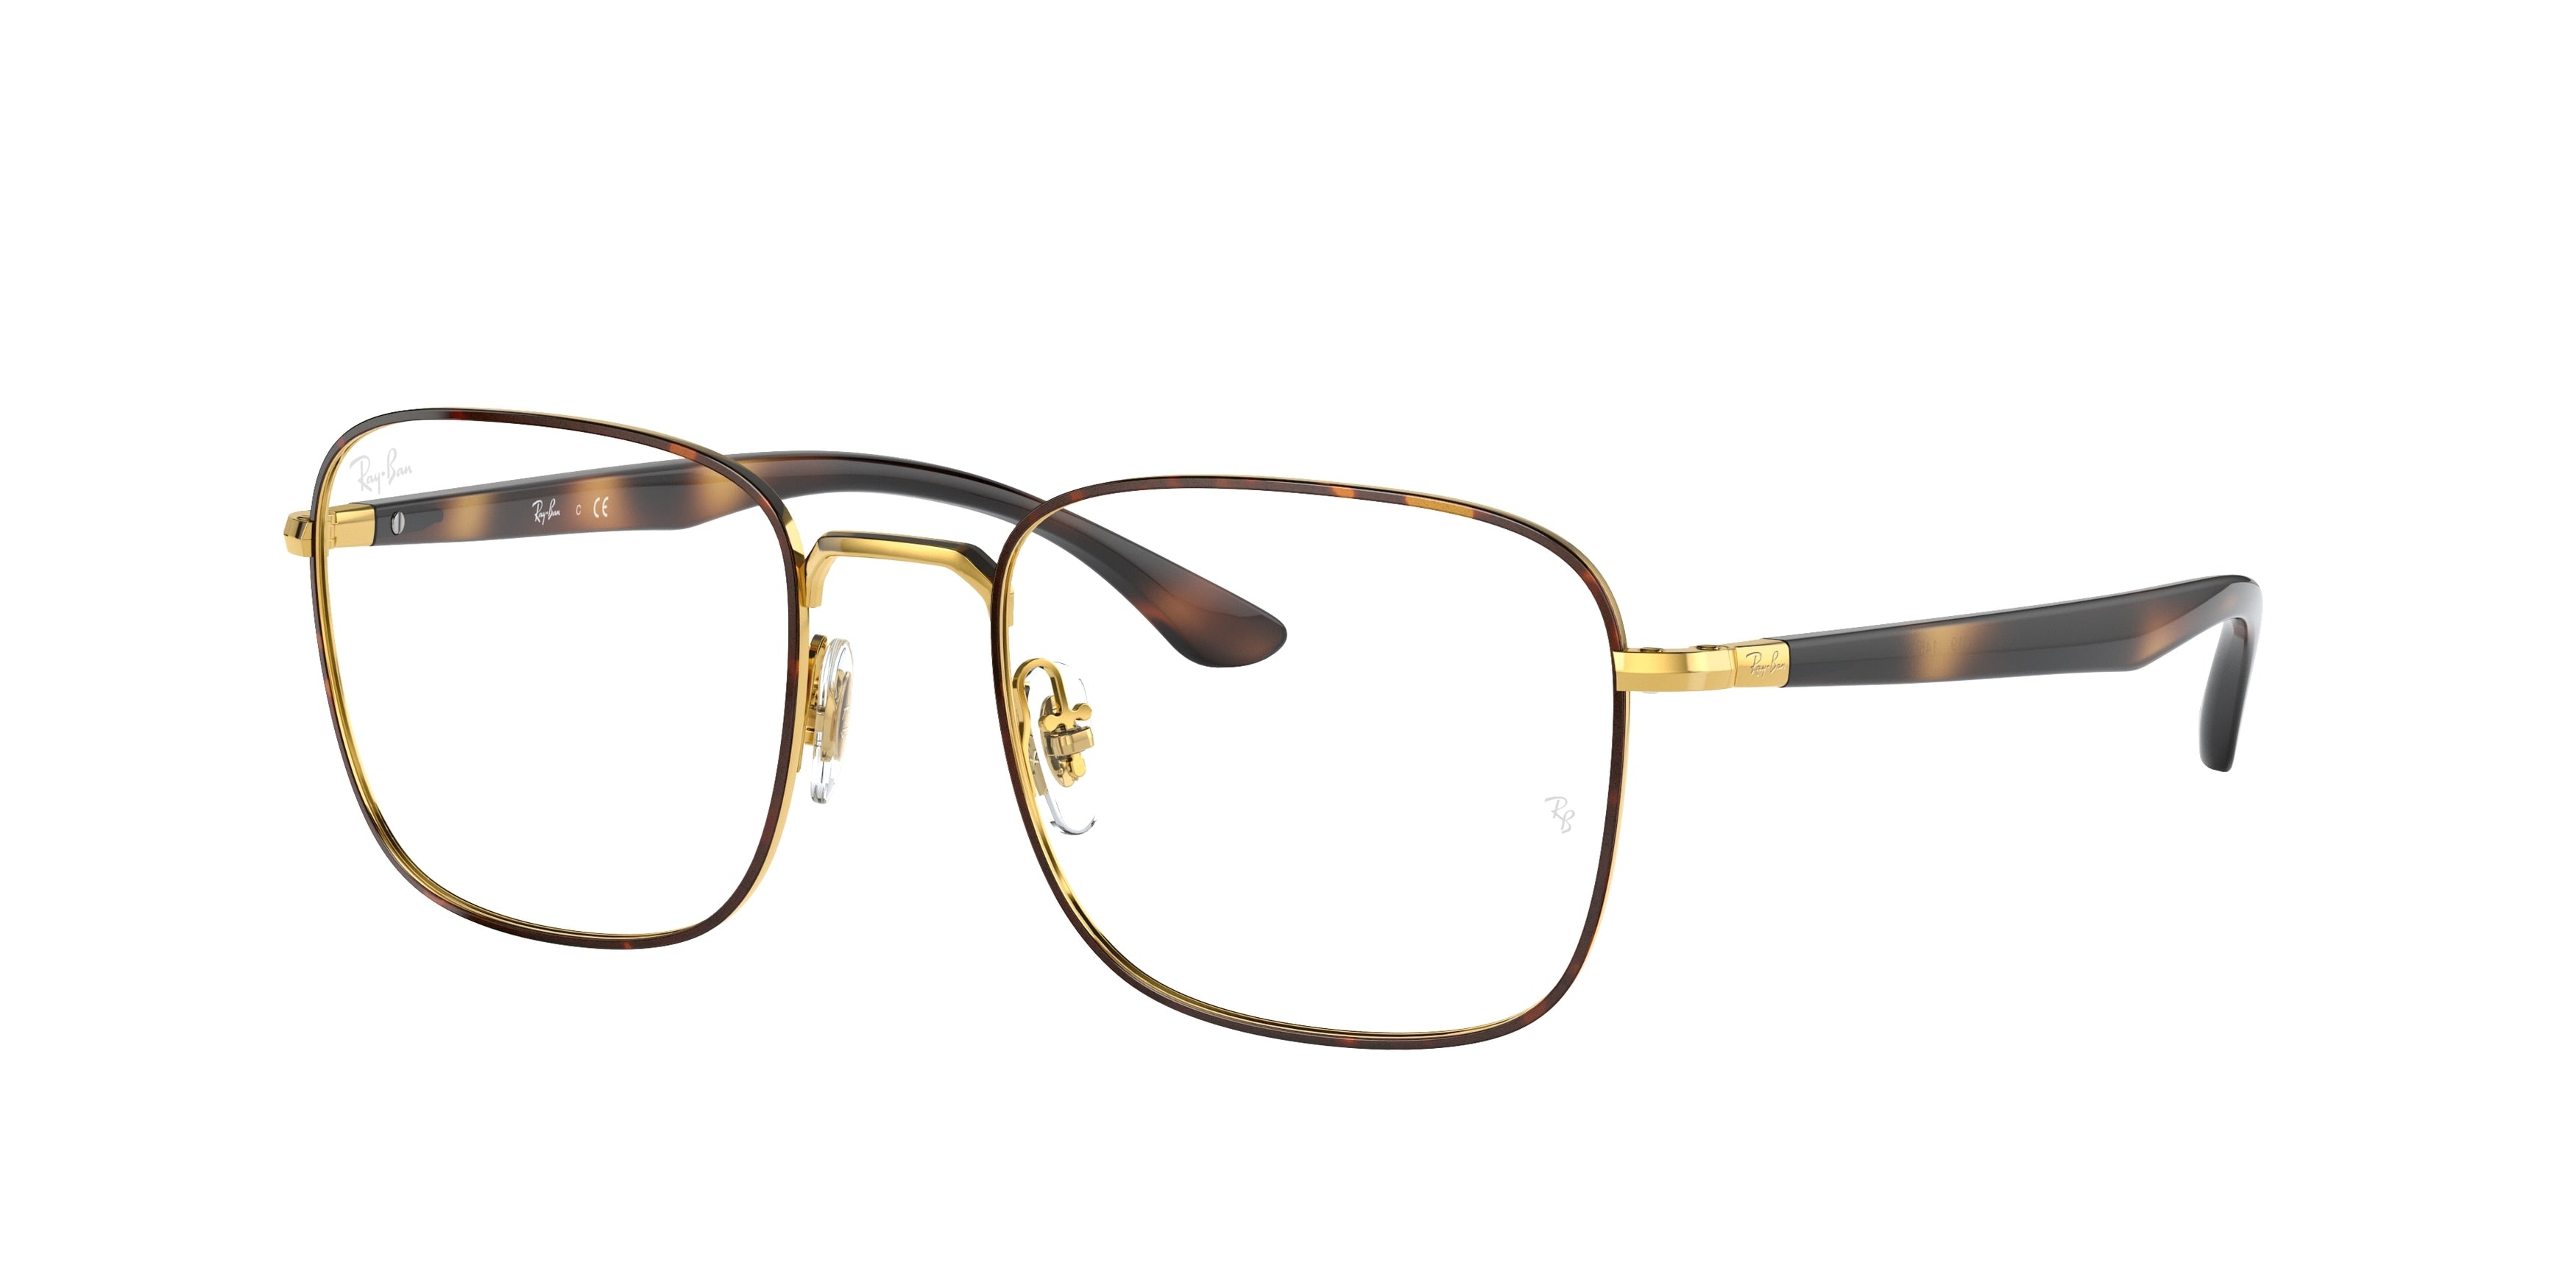 Ray-Ban Optical RX6469 Square Eyeglasses  2945-Havana On Gold 50-145-19 - Color Map Tortoise